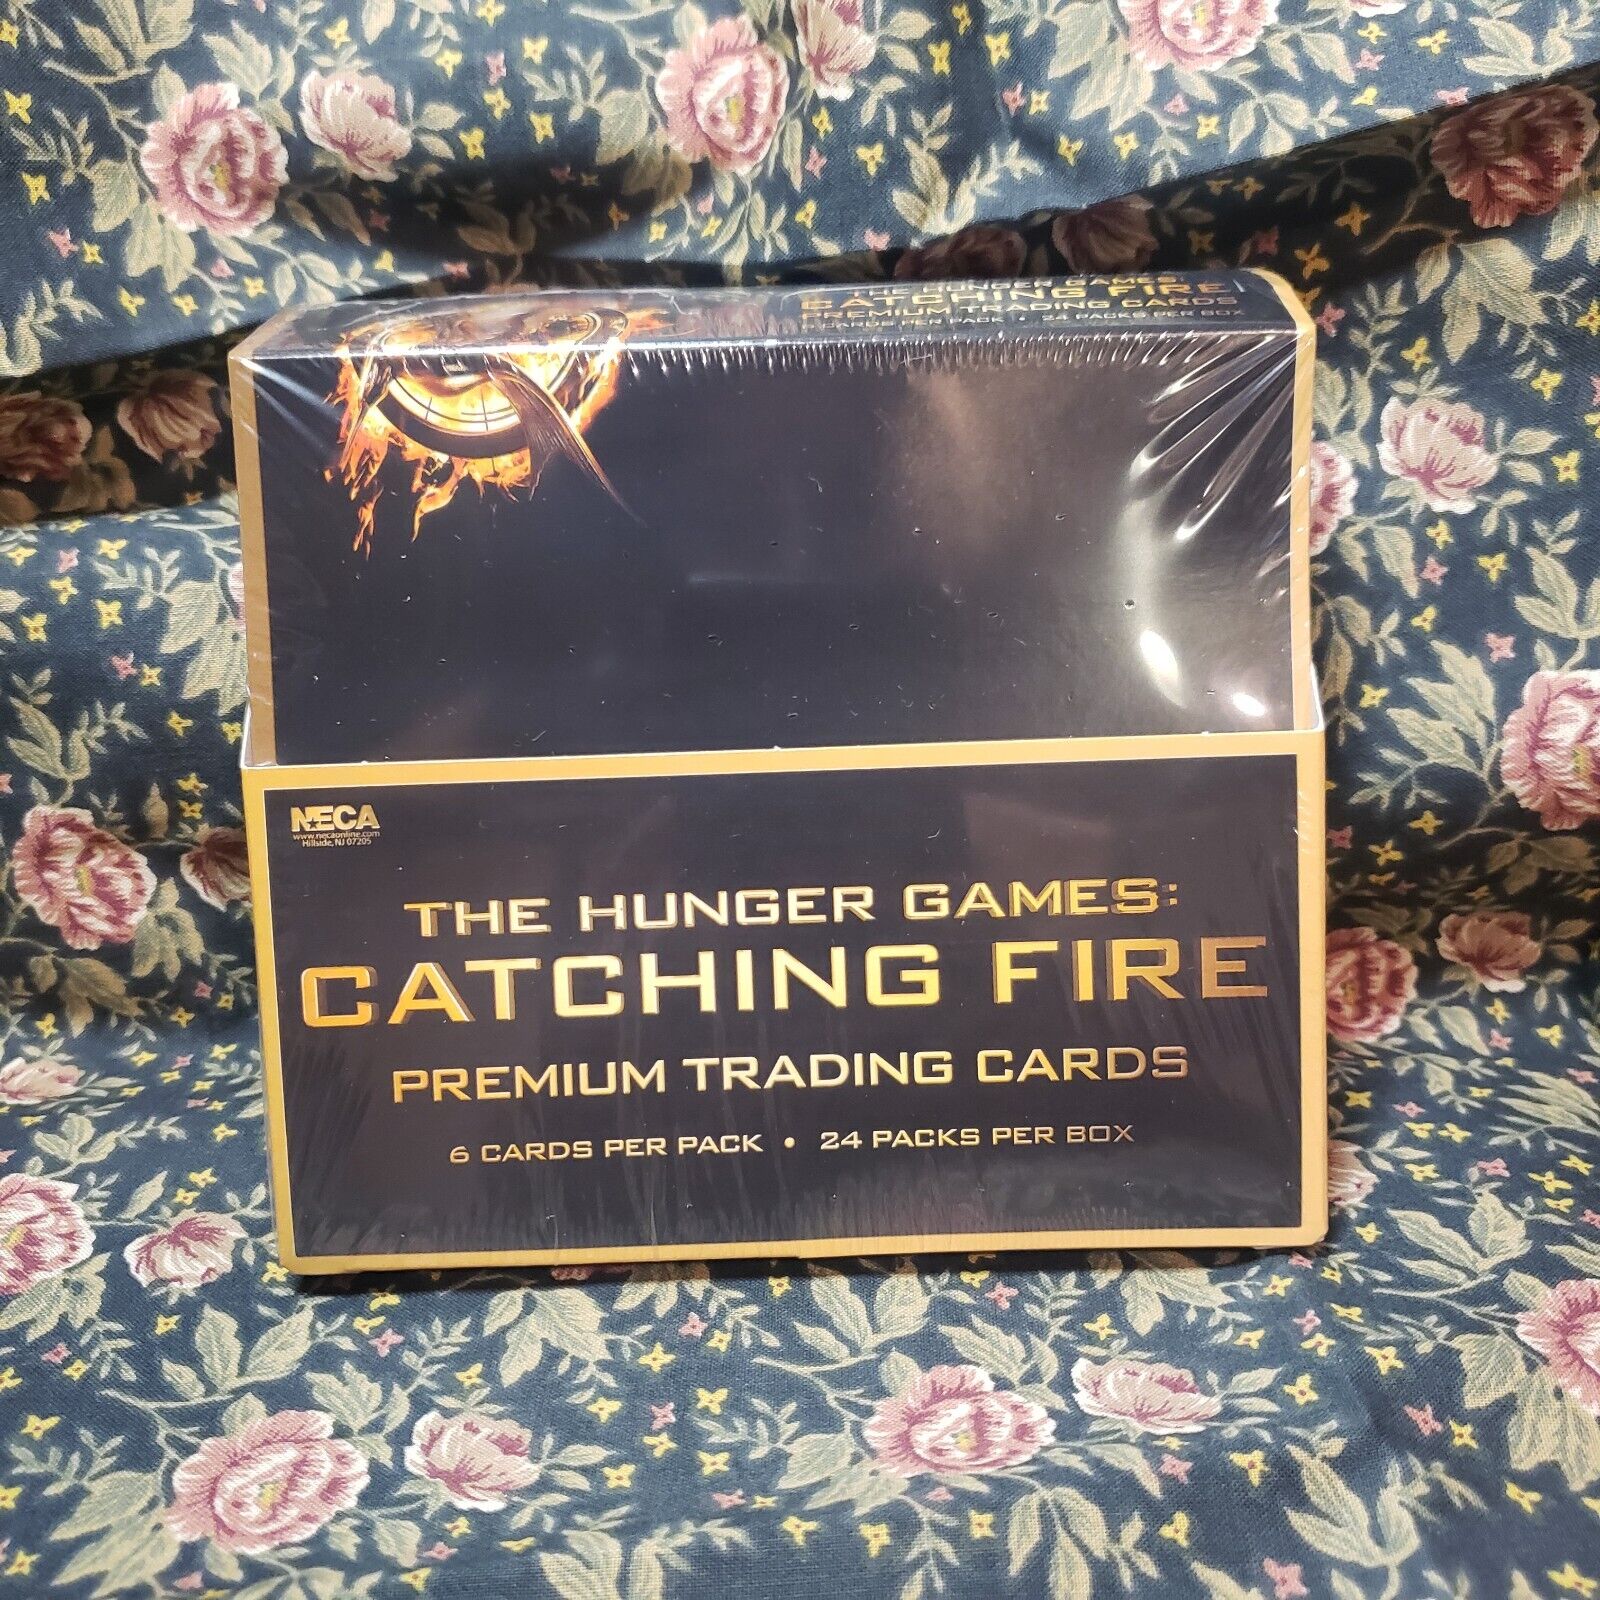 The Hunger Games Catching Fire Trading Cards Unopened Box 24 Packs of 6 Cards